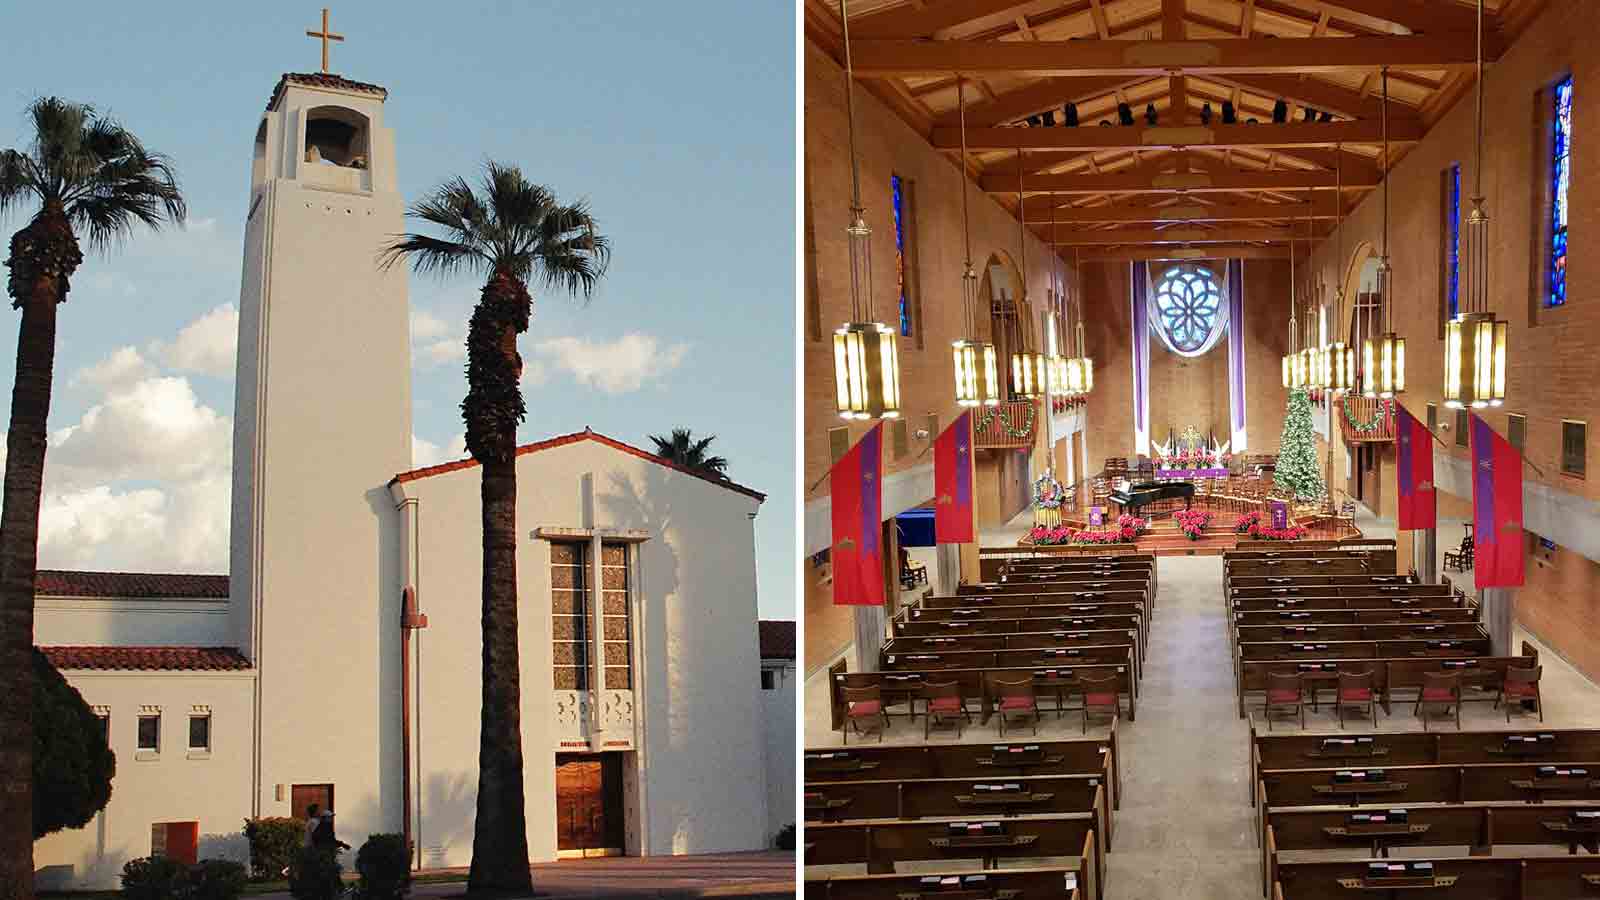 After 154 years of operations, the Central United Methodist Church in Phoenix is set to close. (Cen...